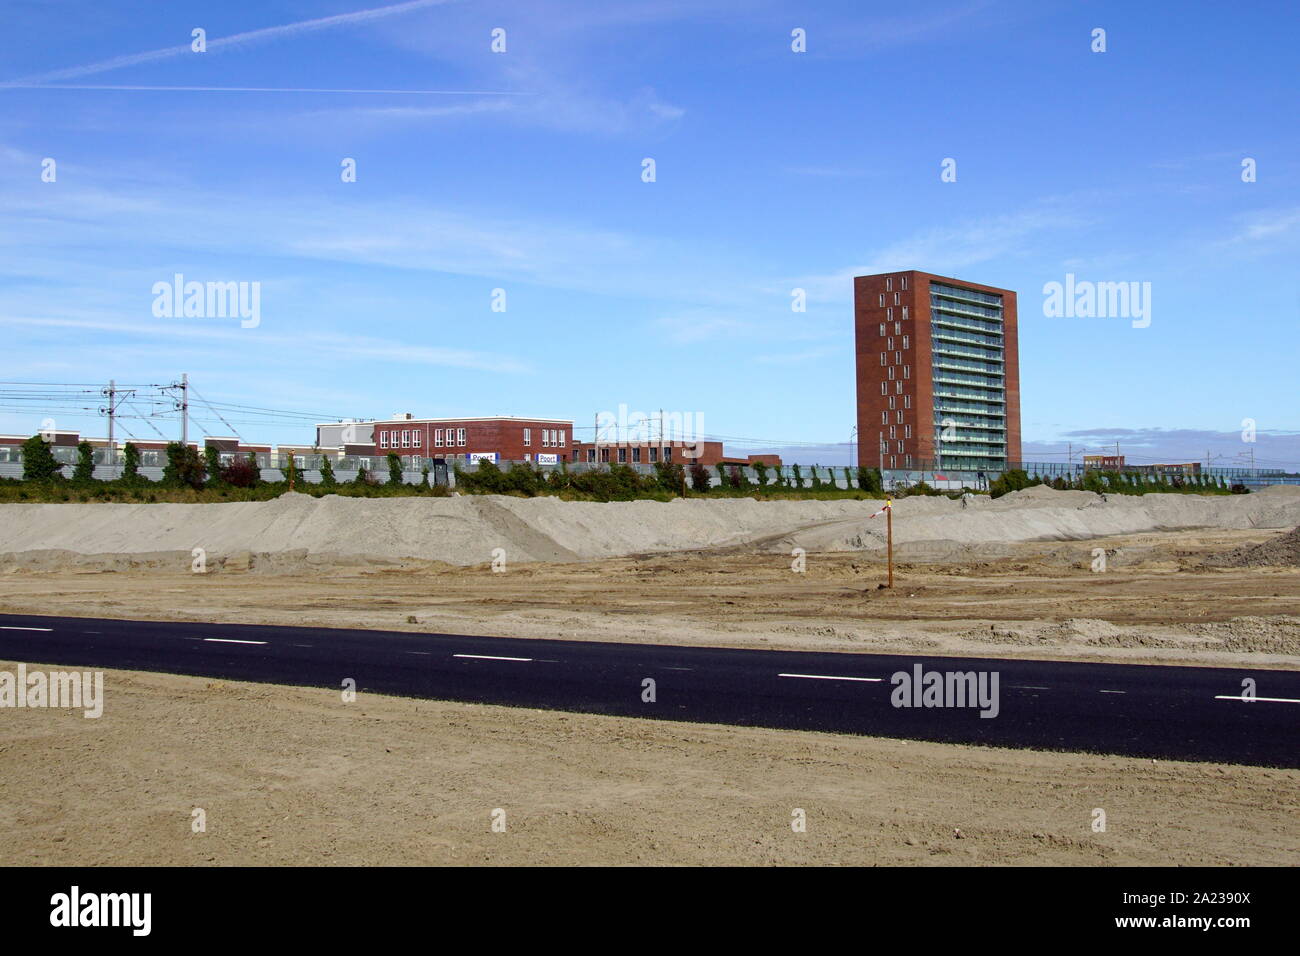 Almere Poort, the Netherland - September 20, 2019: Construction site Eruropakwartier Oost in the Dutch city of Almere. Stock Photo